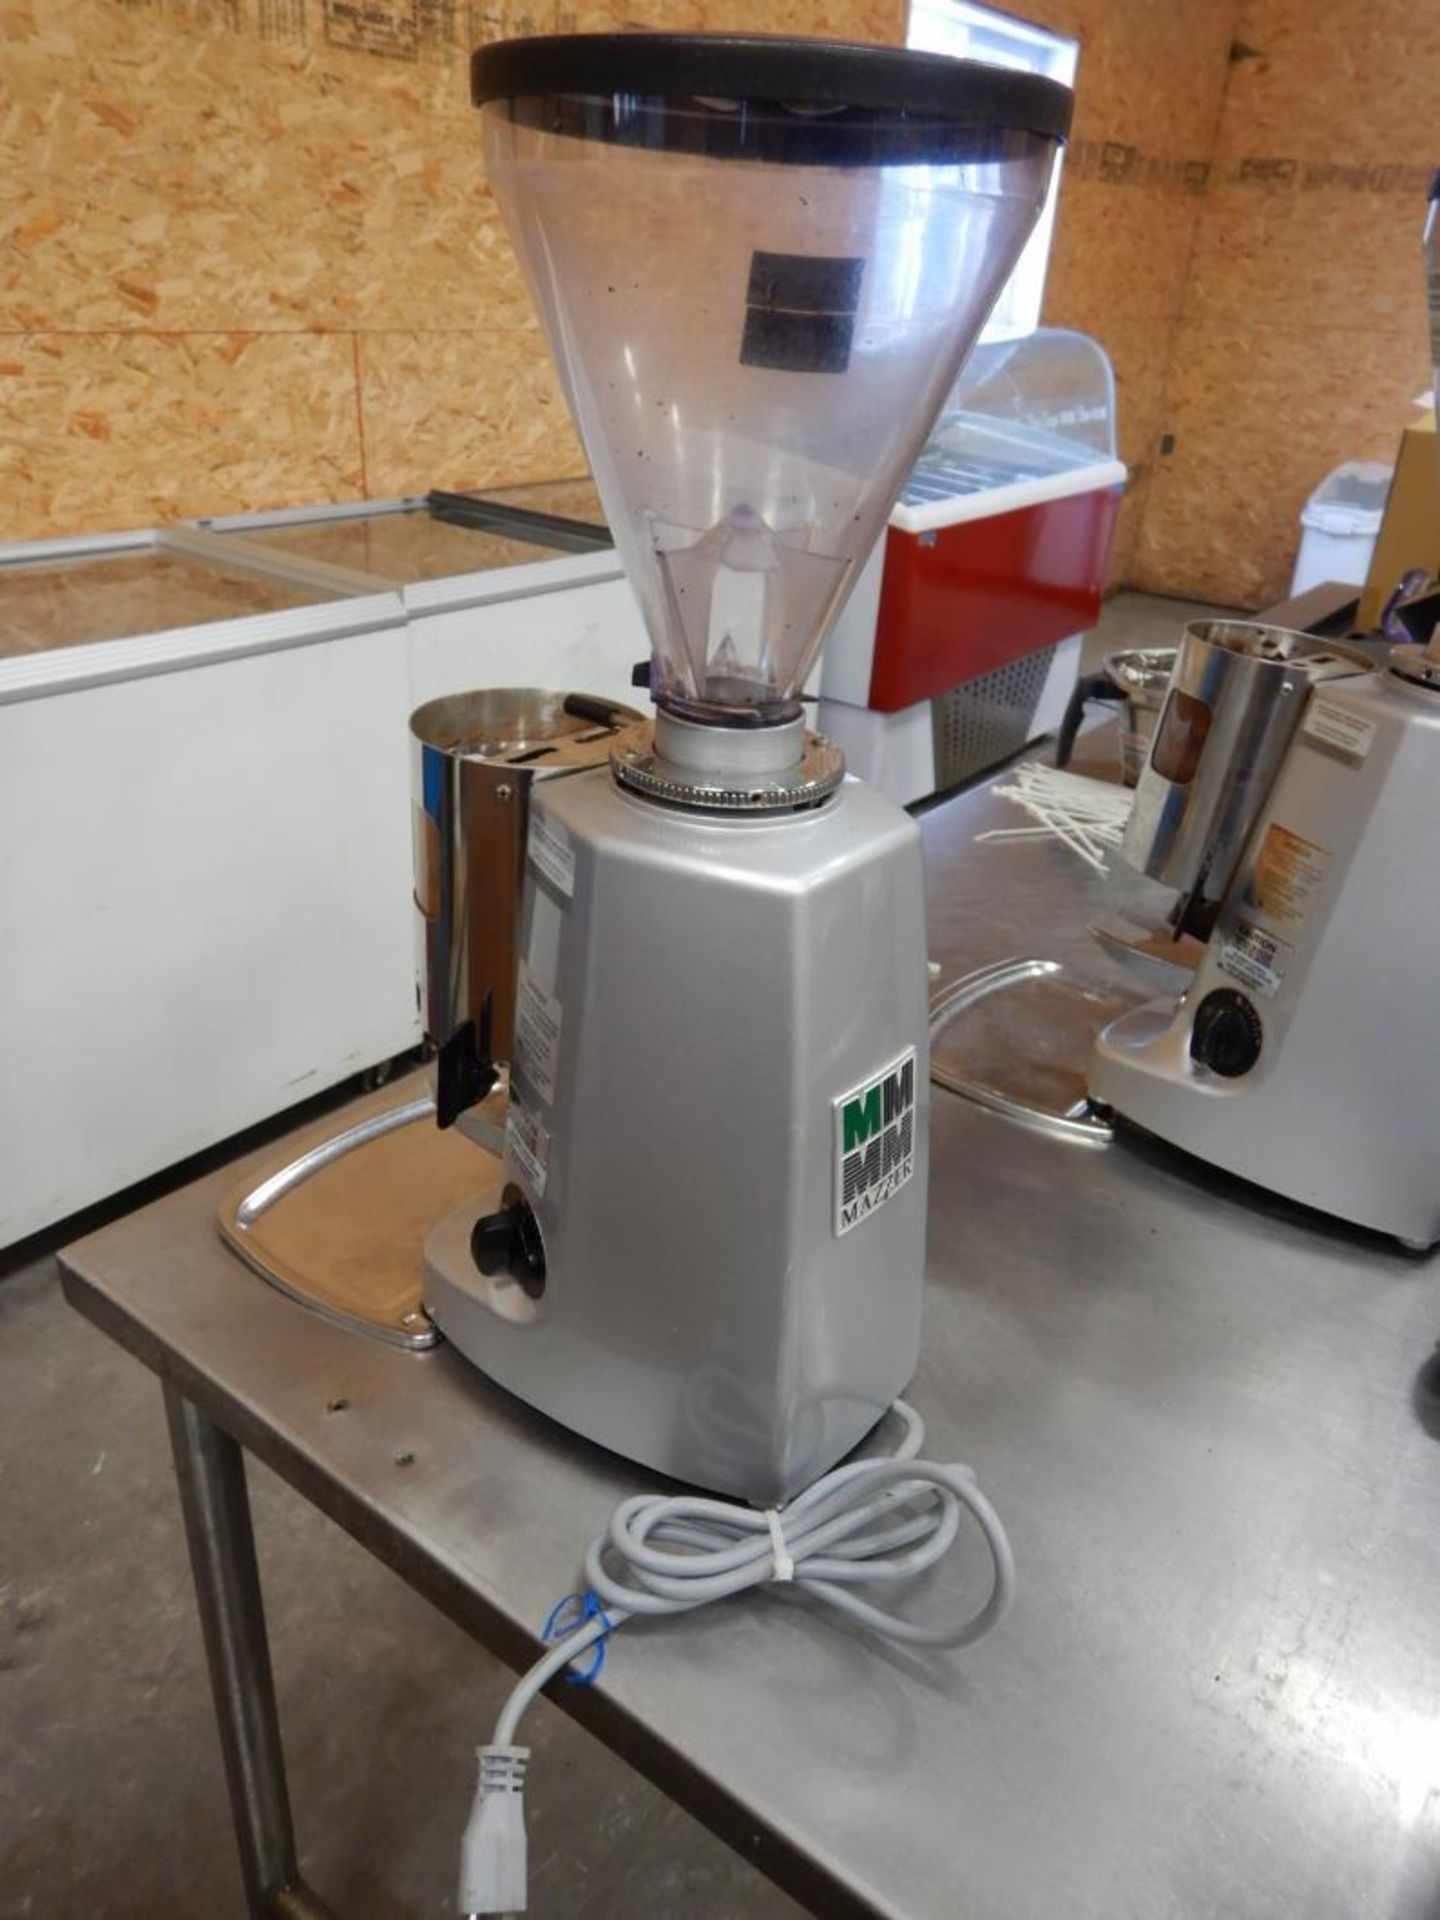 MAZZER SUPER JOLLY TIMER ELECTRONIC EXPRESSO GRINDER S/N 1204987(RECENTLY SERVICED) - Image 4 of 4